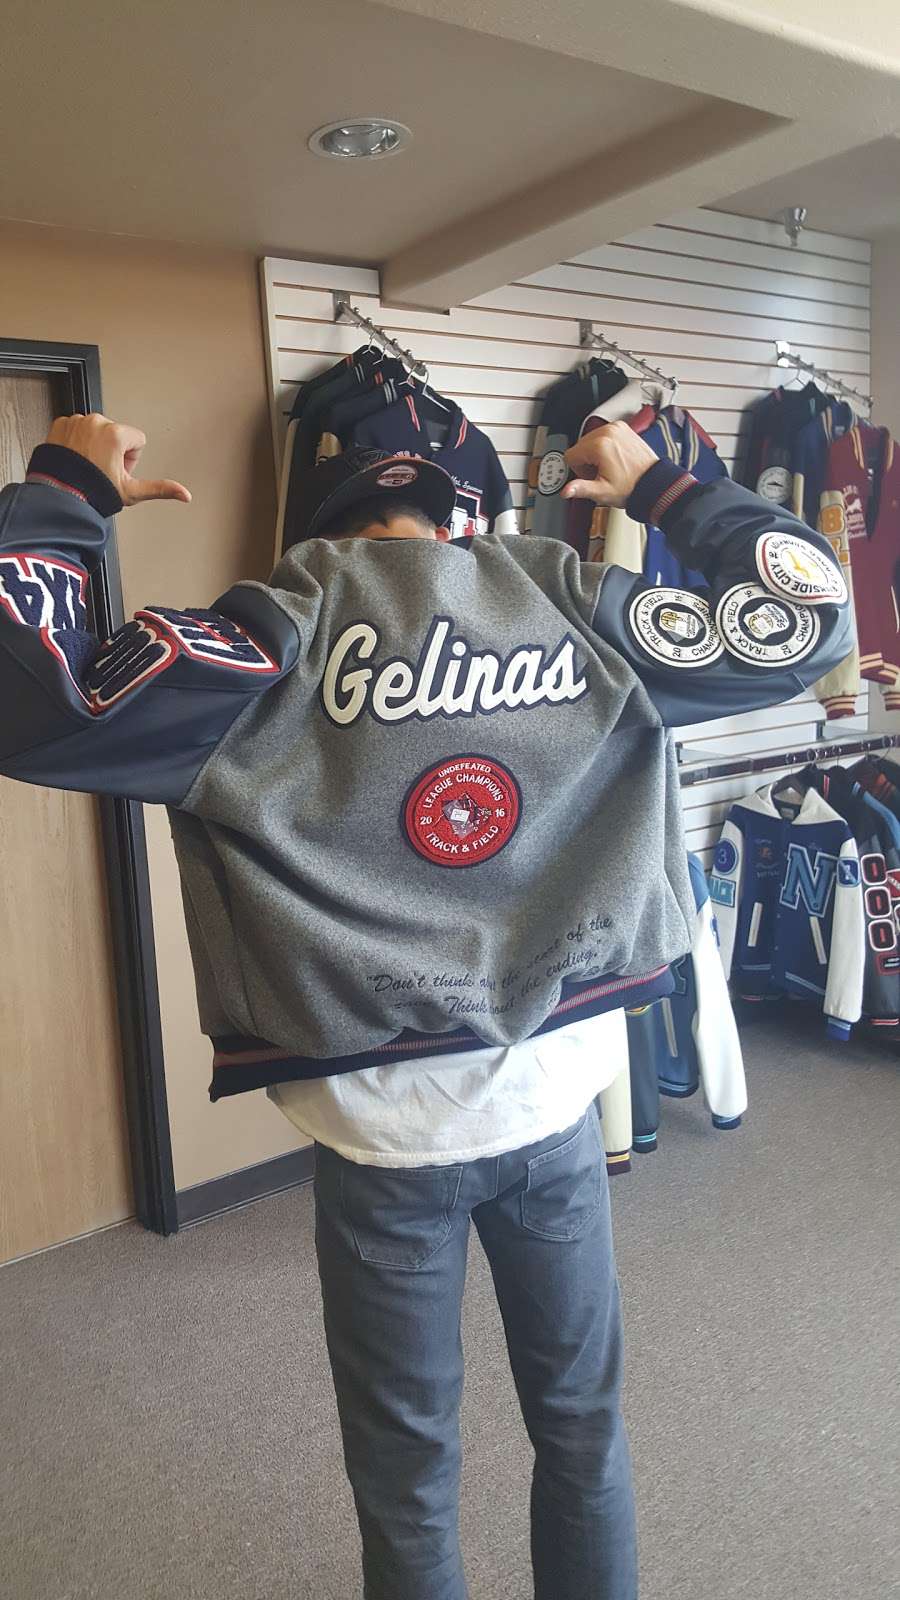 J L Custom Jackets | 7161 Old 215 Frontage Rd, Moreno Valley, CA 92553, USA | Phone: (951) 867-3200